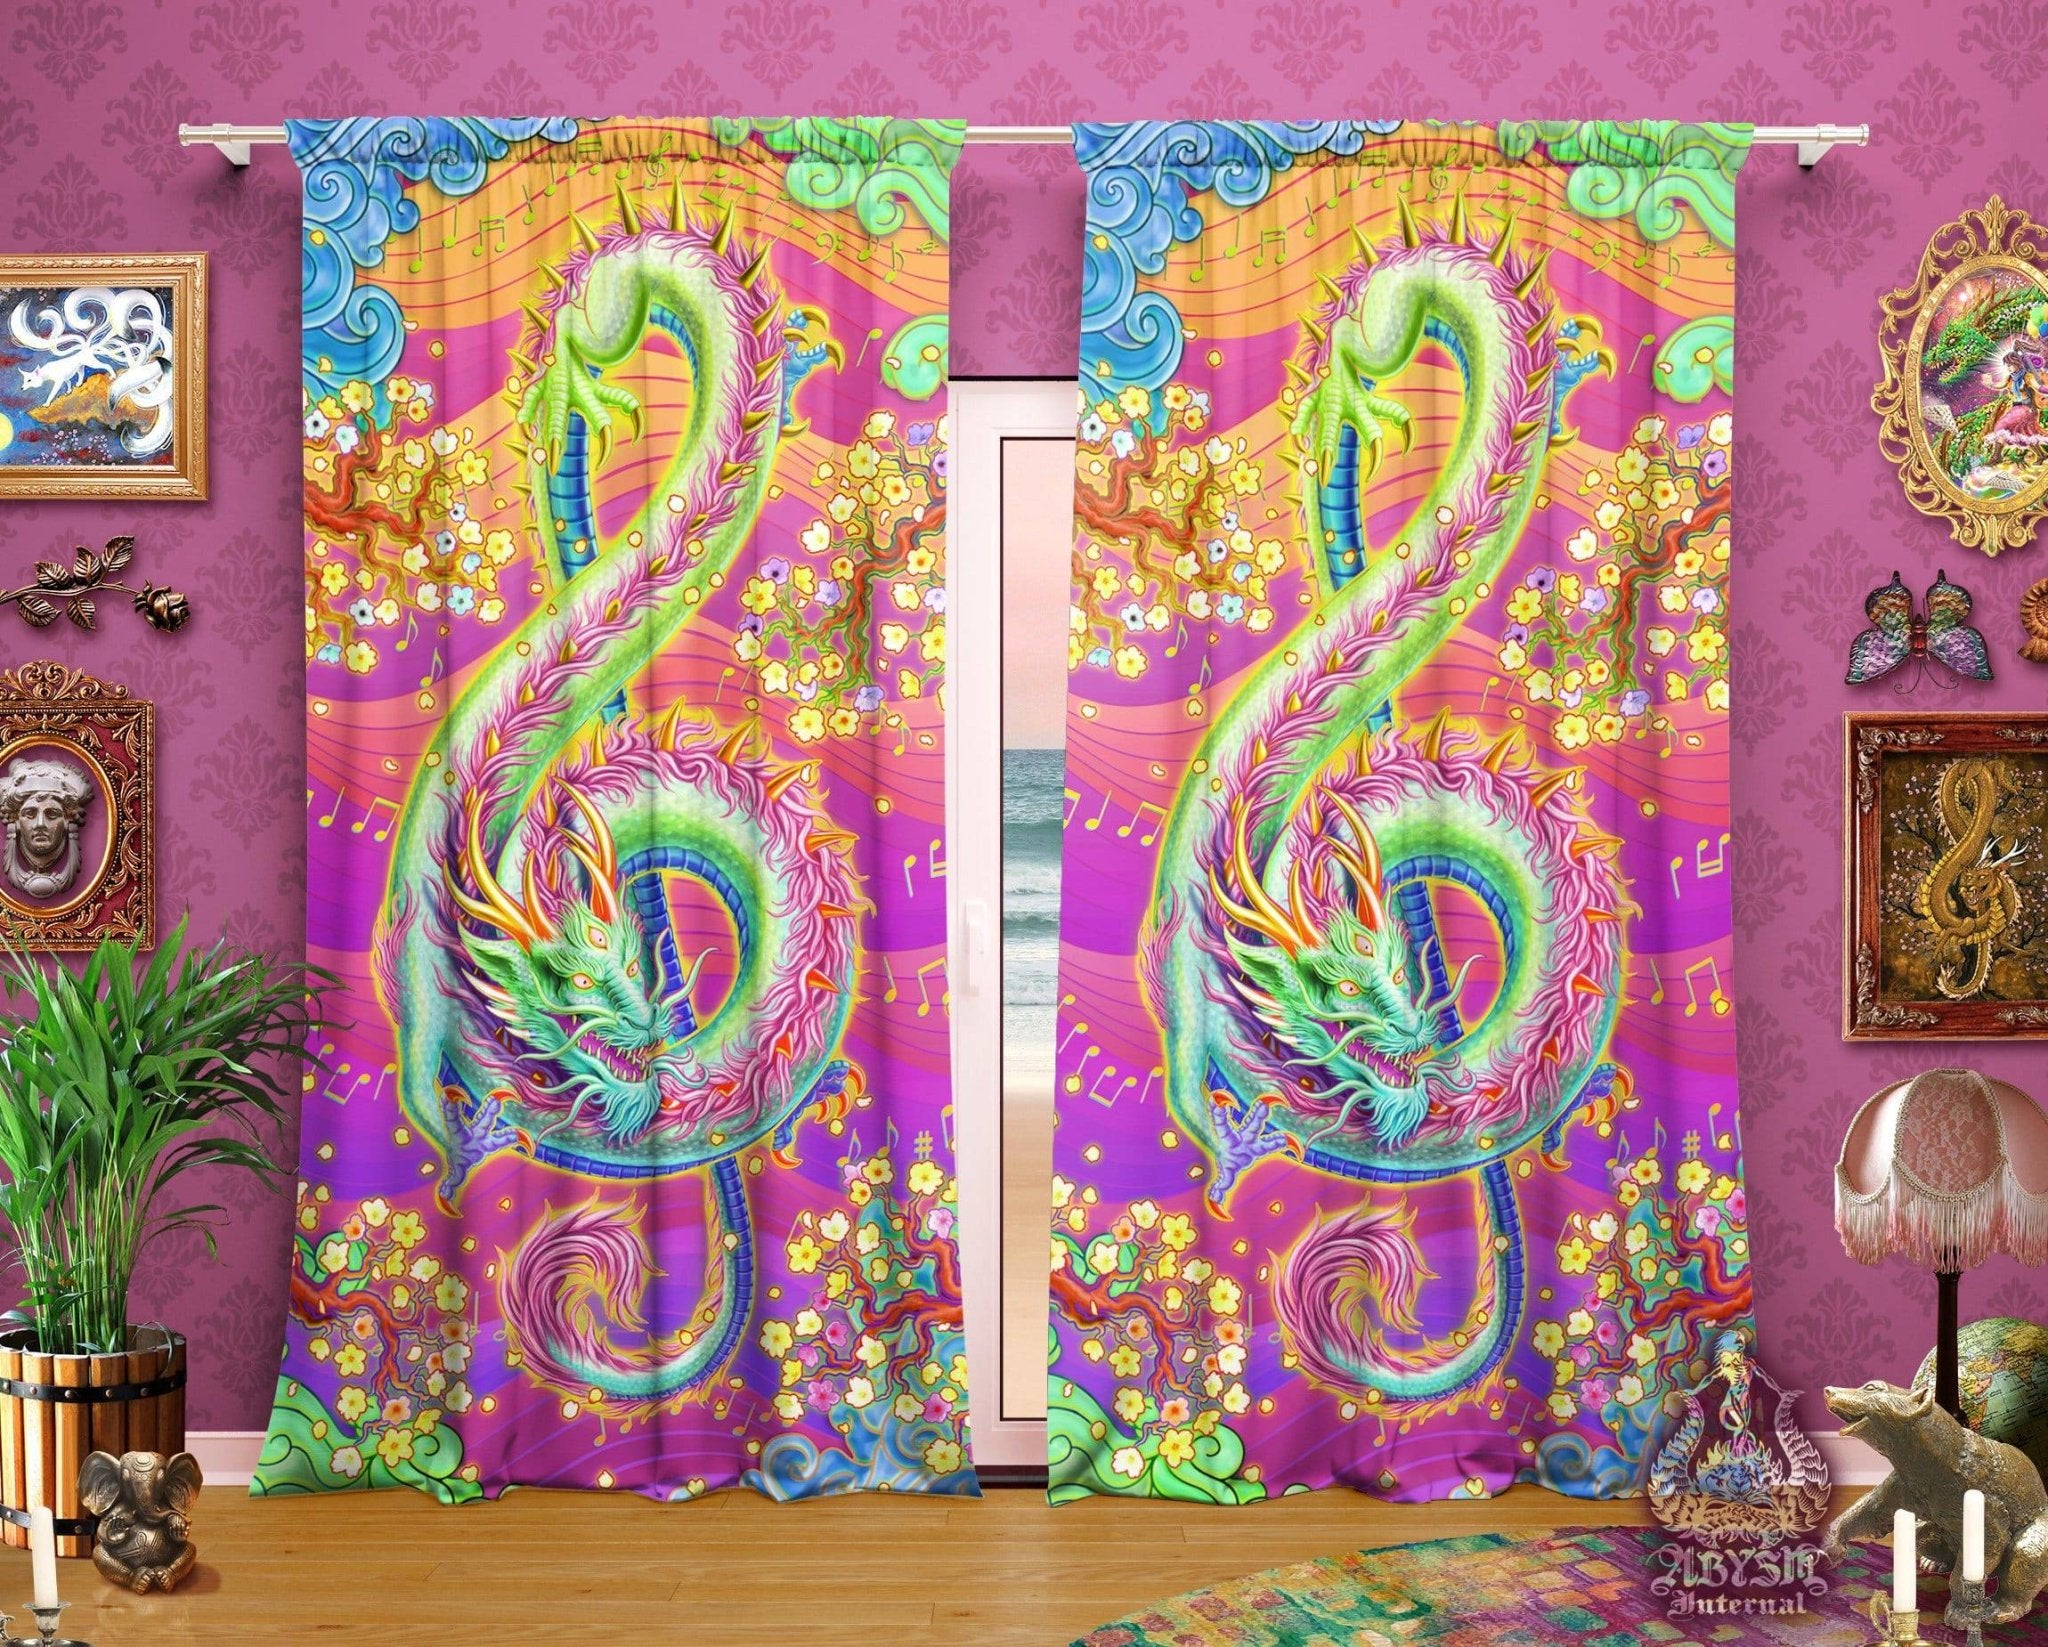 Psychedelic Blackout Curtains, Long Window Panels, Kidcore Room, Indie and Alternative Decor, Art Print - Psy Neon Dragon - Abysm Internal